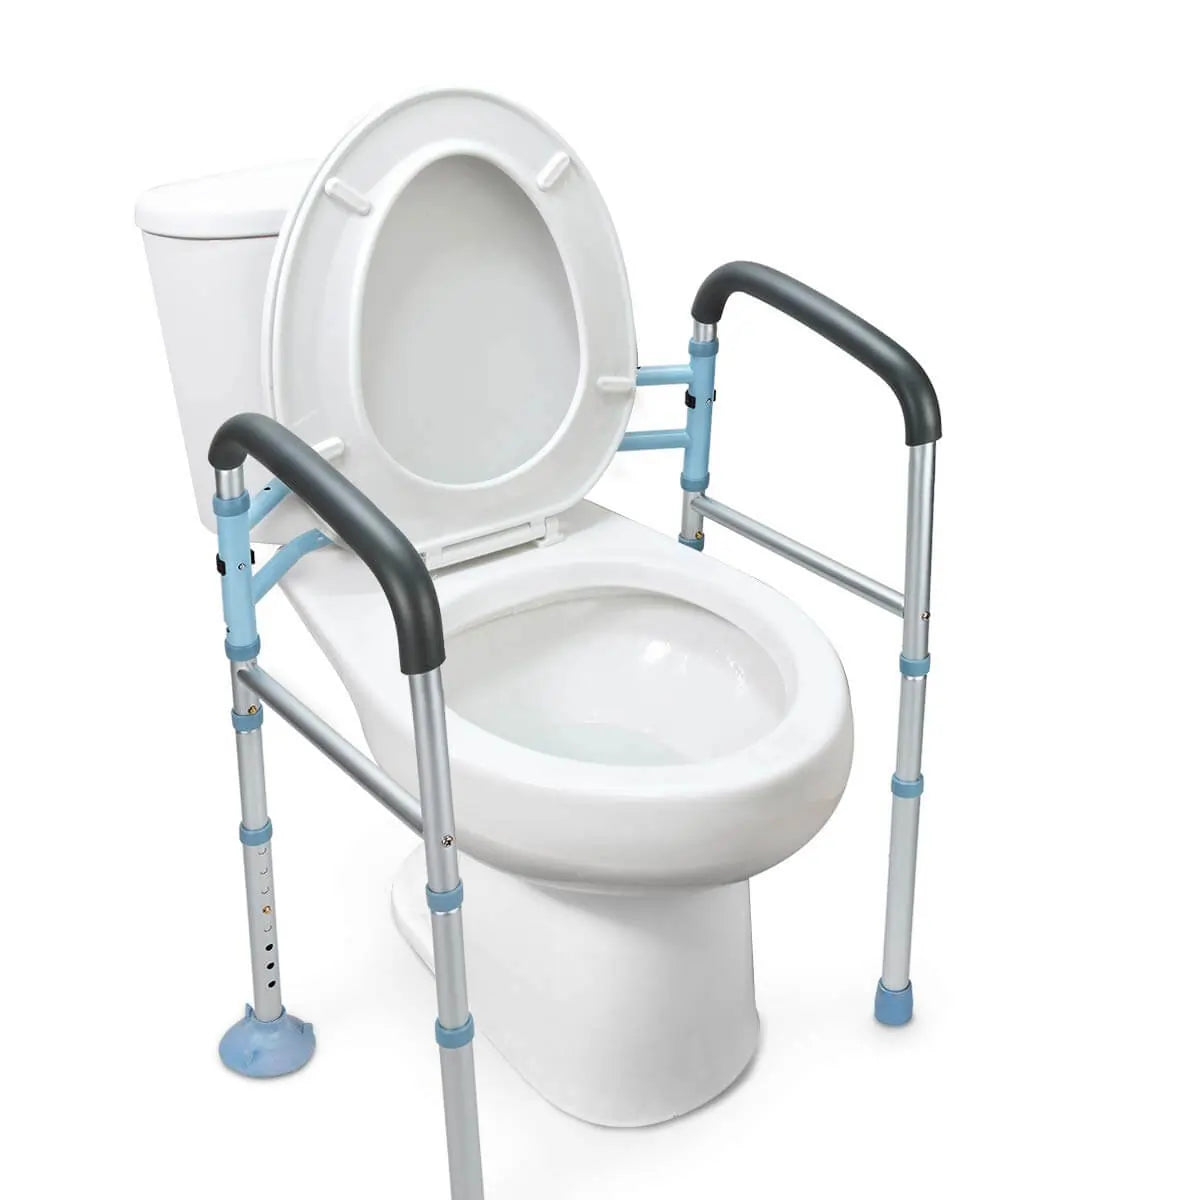 Oasisspace Stand Alone Toilet Safety Rail - Heavy Duty Medical Toilet Safety for